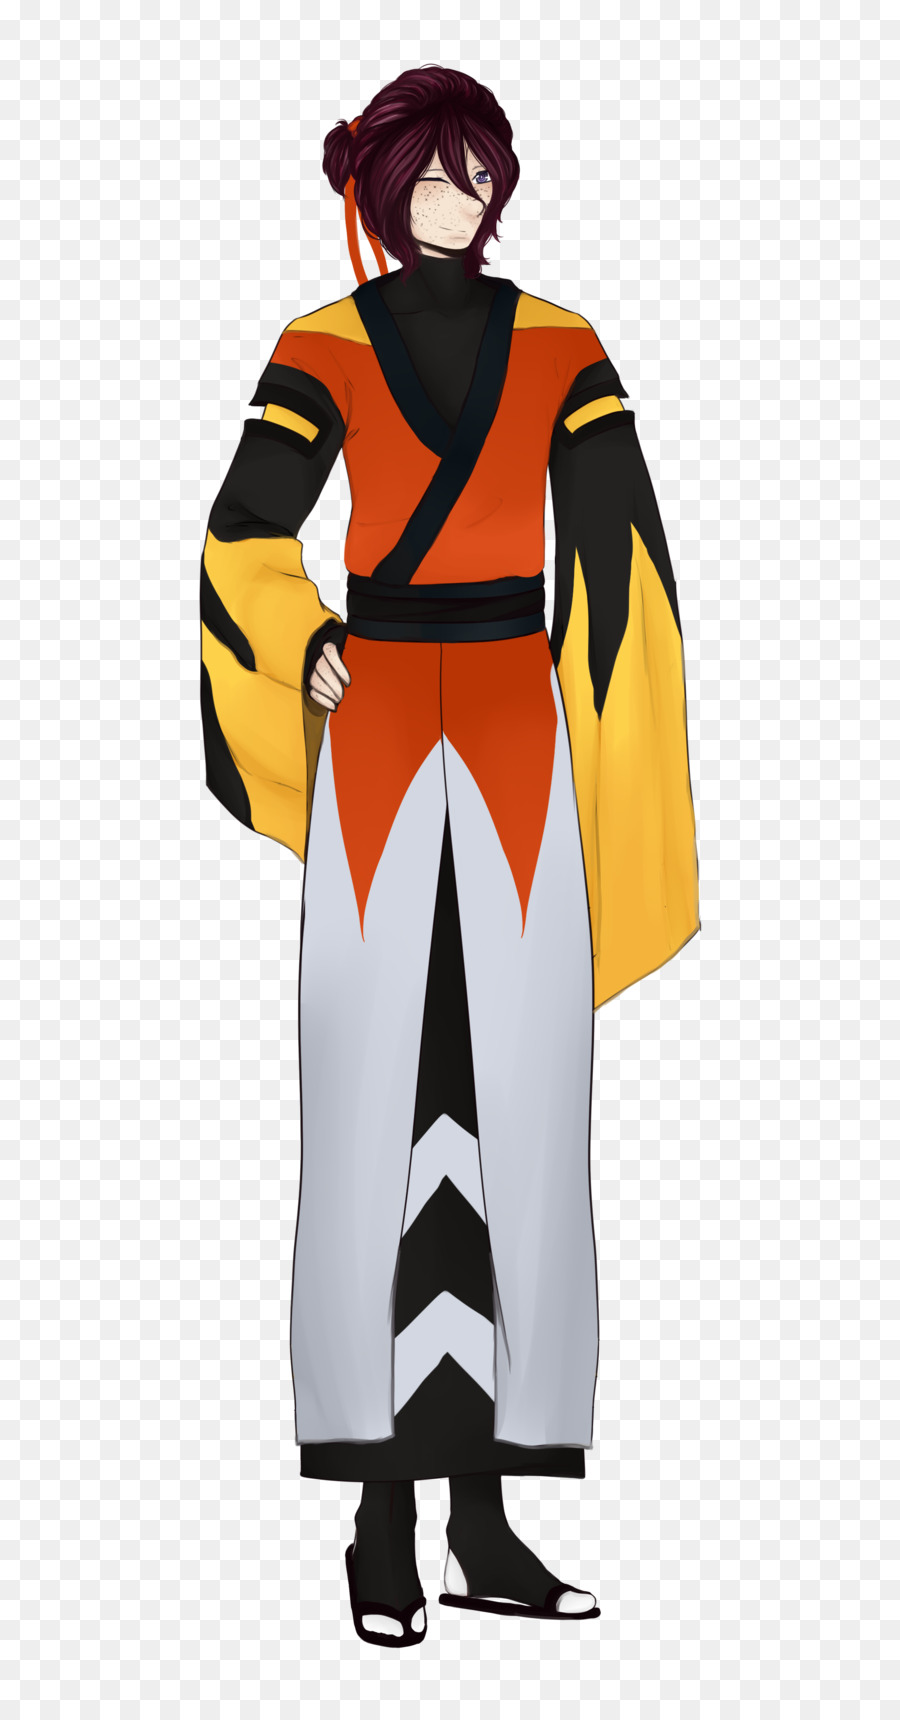 Robe，Costume PNG